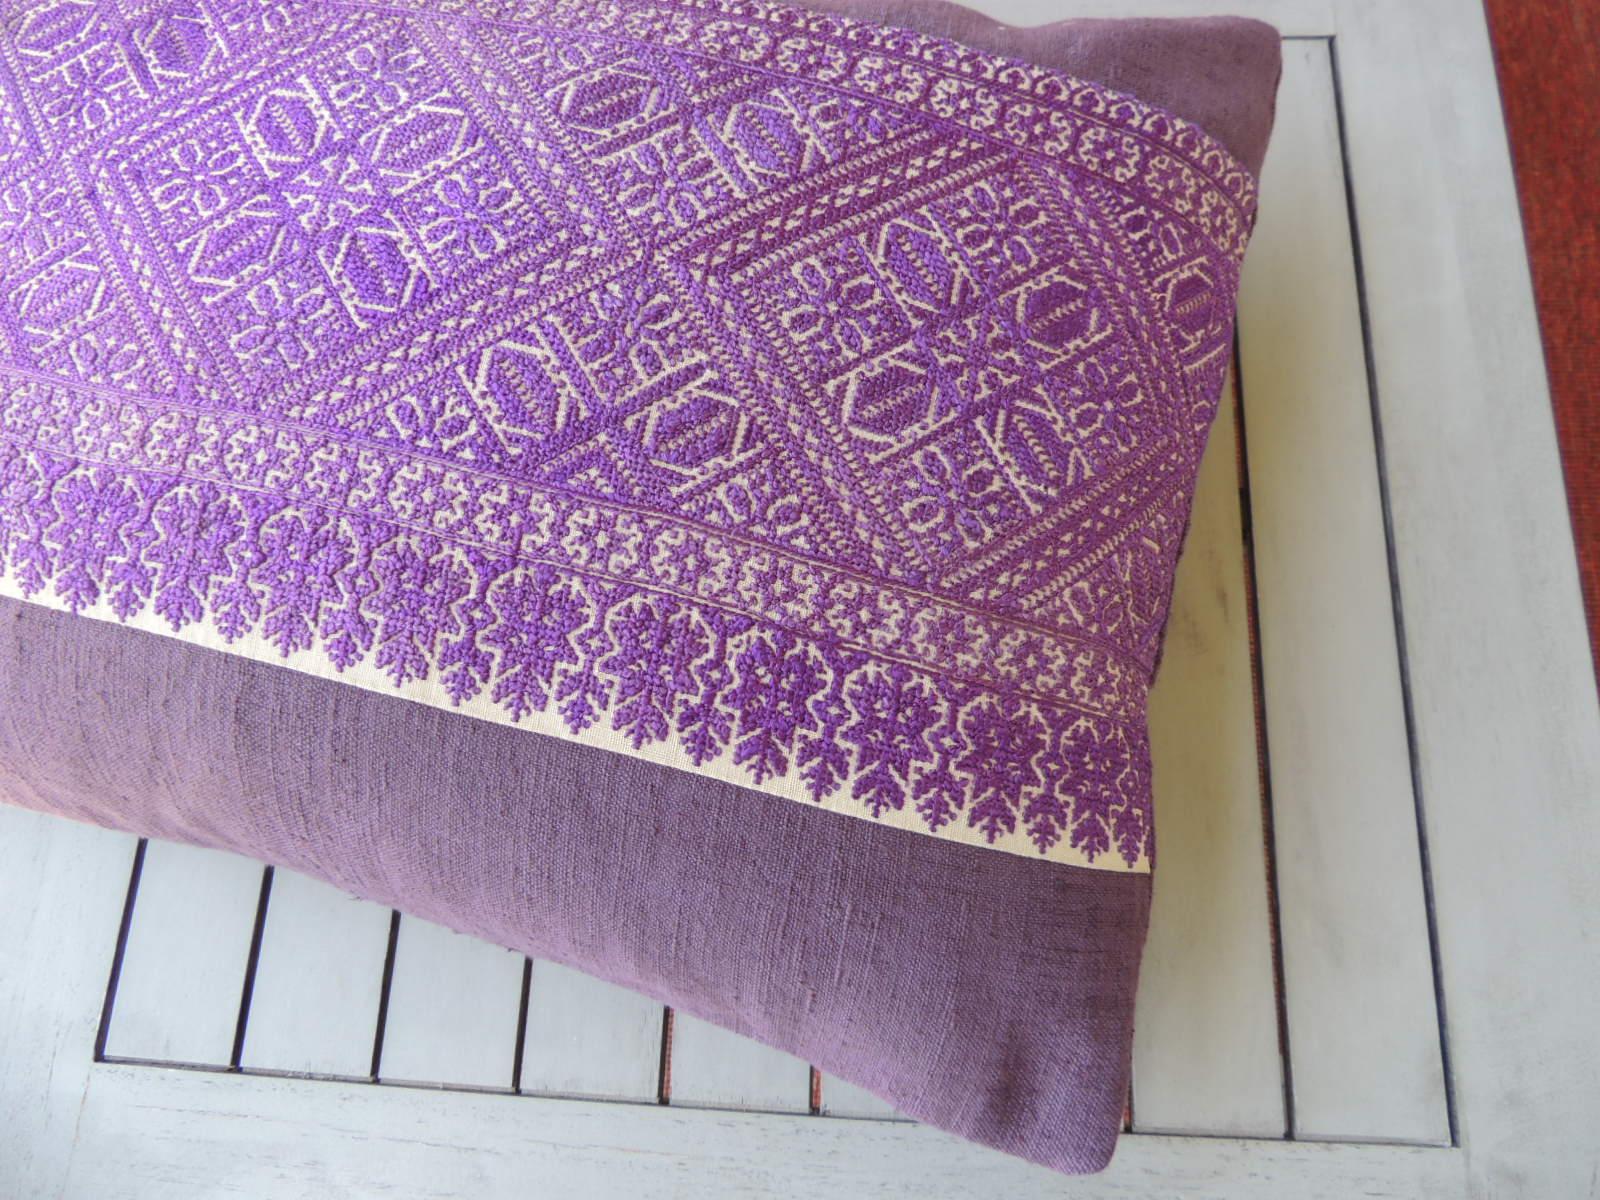 Moroccan Antique Purple and White Embroidered Fez Decorative Bolster Pillow